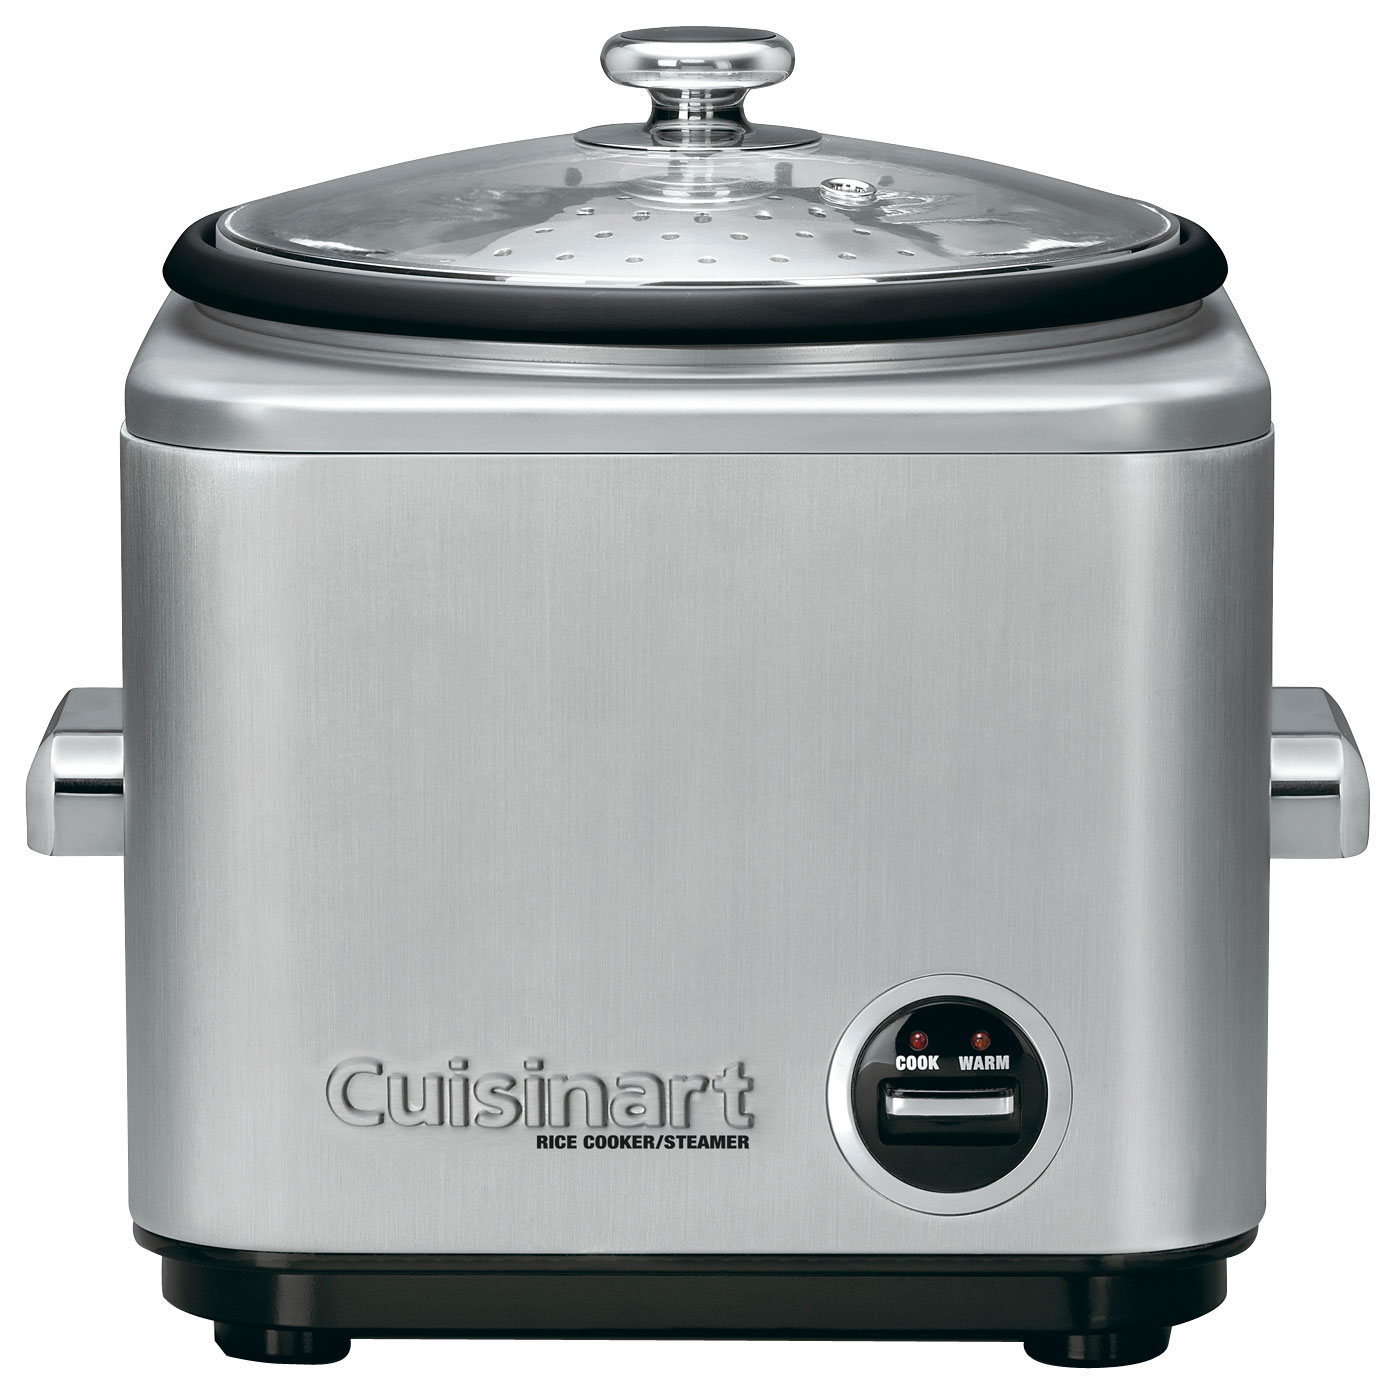 Cuisinart - 15-Cup Rice Cooker and Steamer - Brushed Stainless